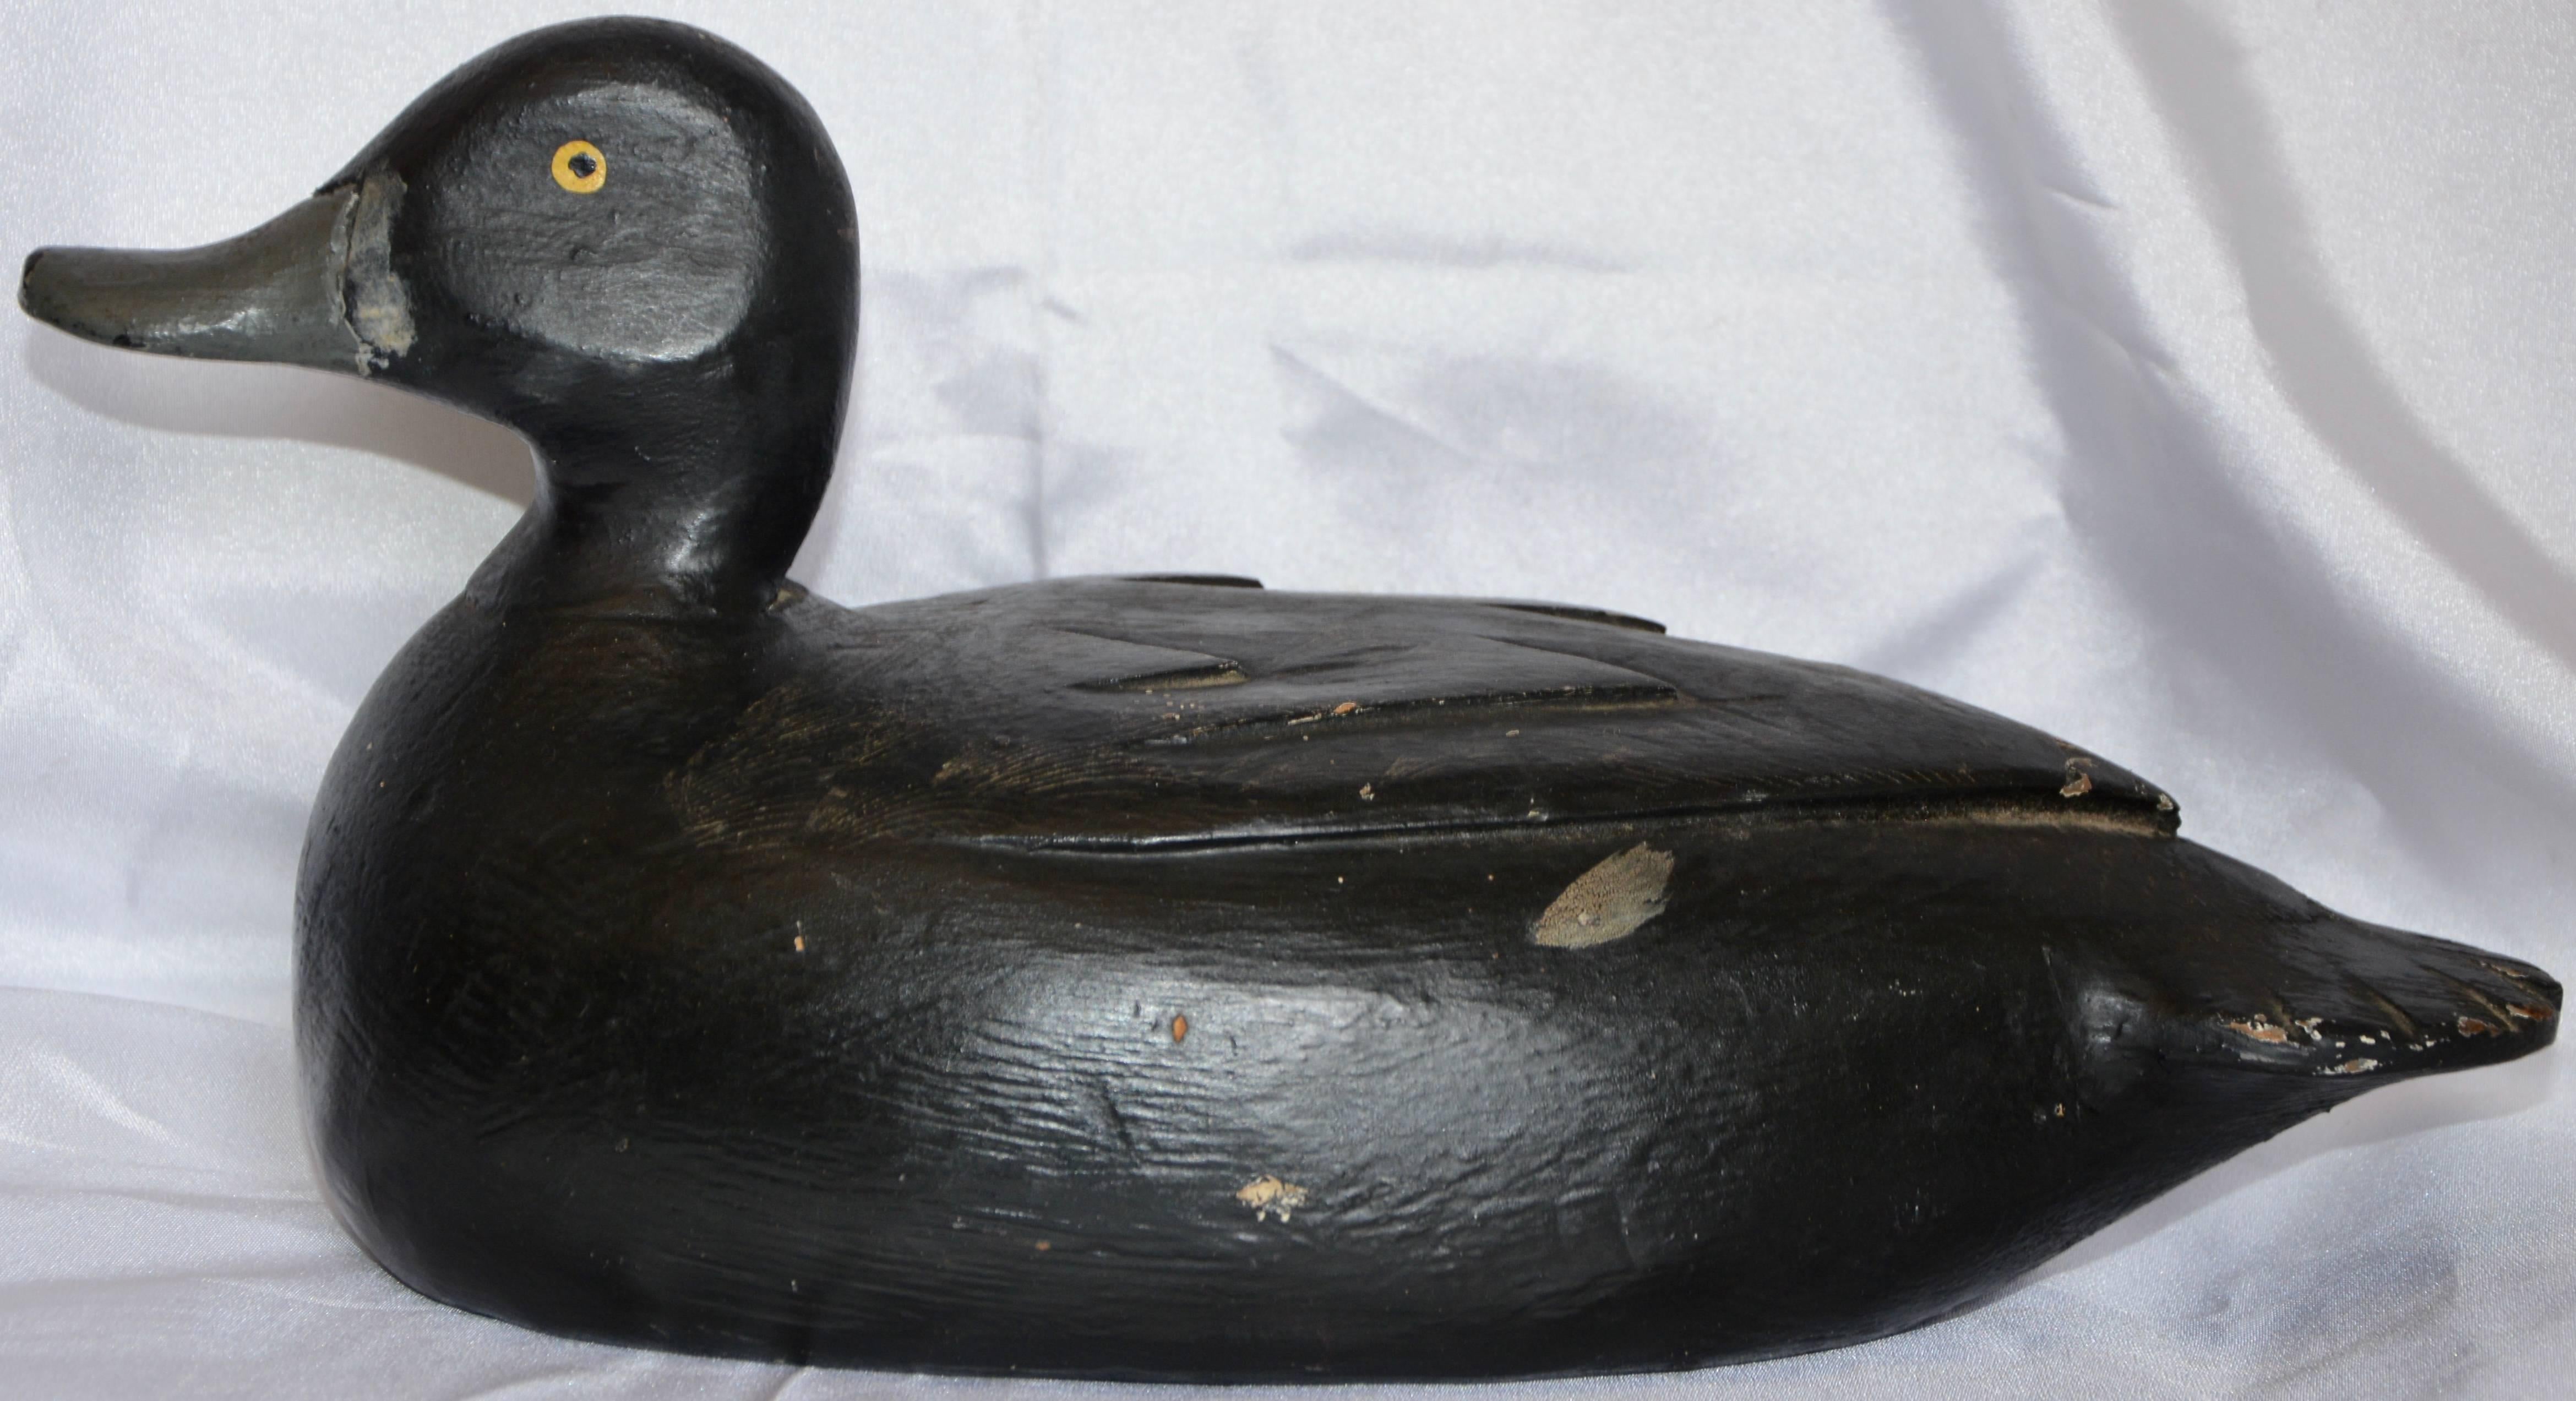 The details on this wooden duck decoy for the New England area are nice. The duck is painted black with tiny strokes of grey paint highlighting his feathers. He will be a great addition to your collection!